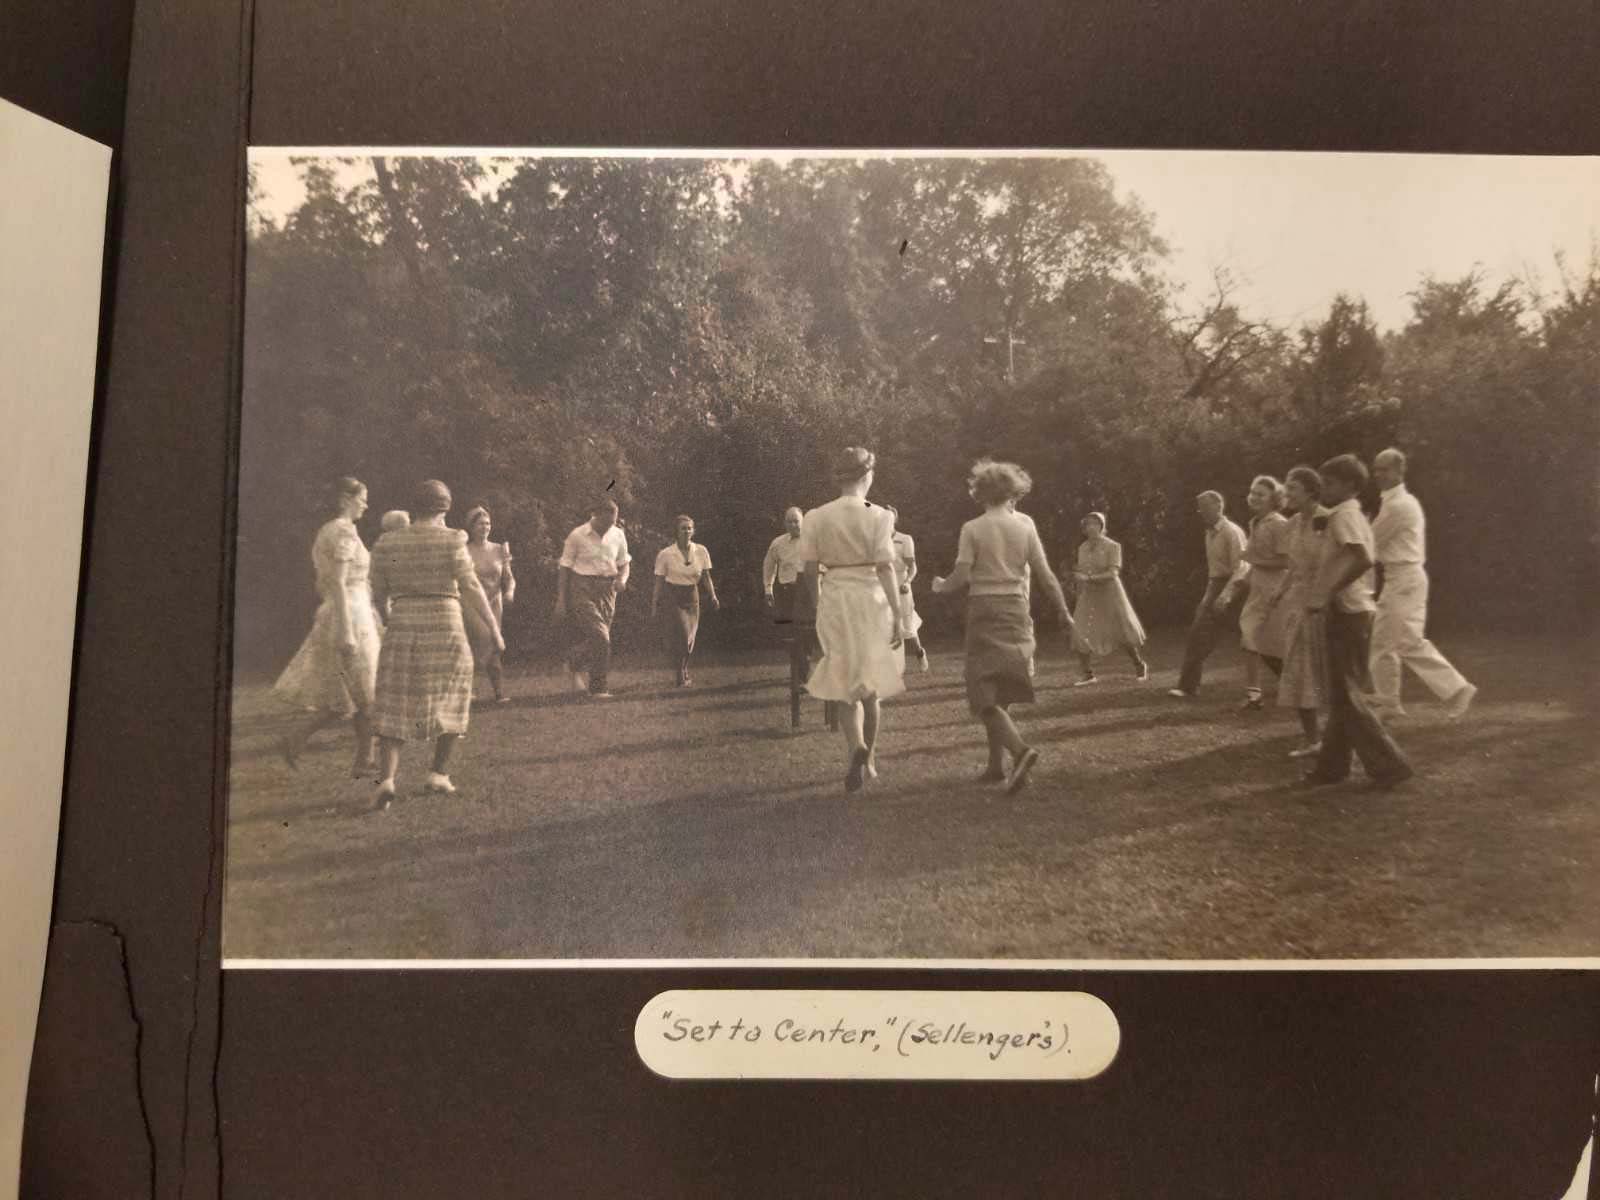 A sepia-toned archive photo of an outdoor dance